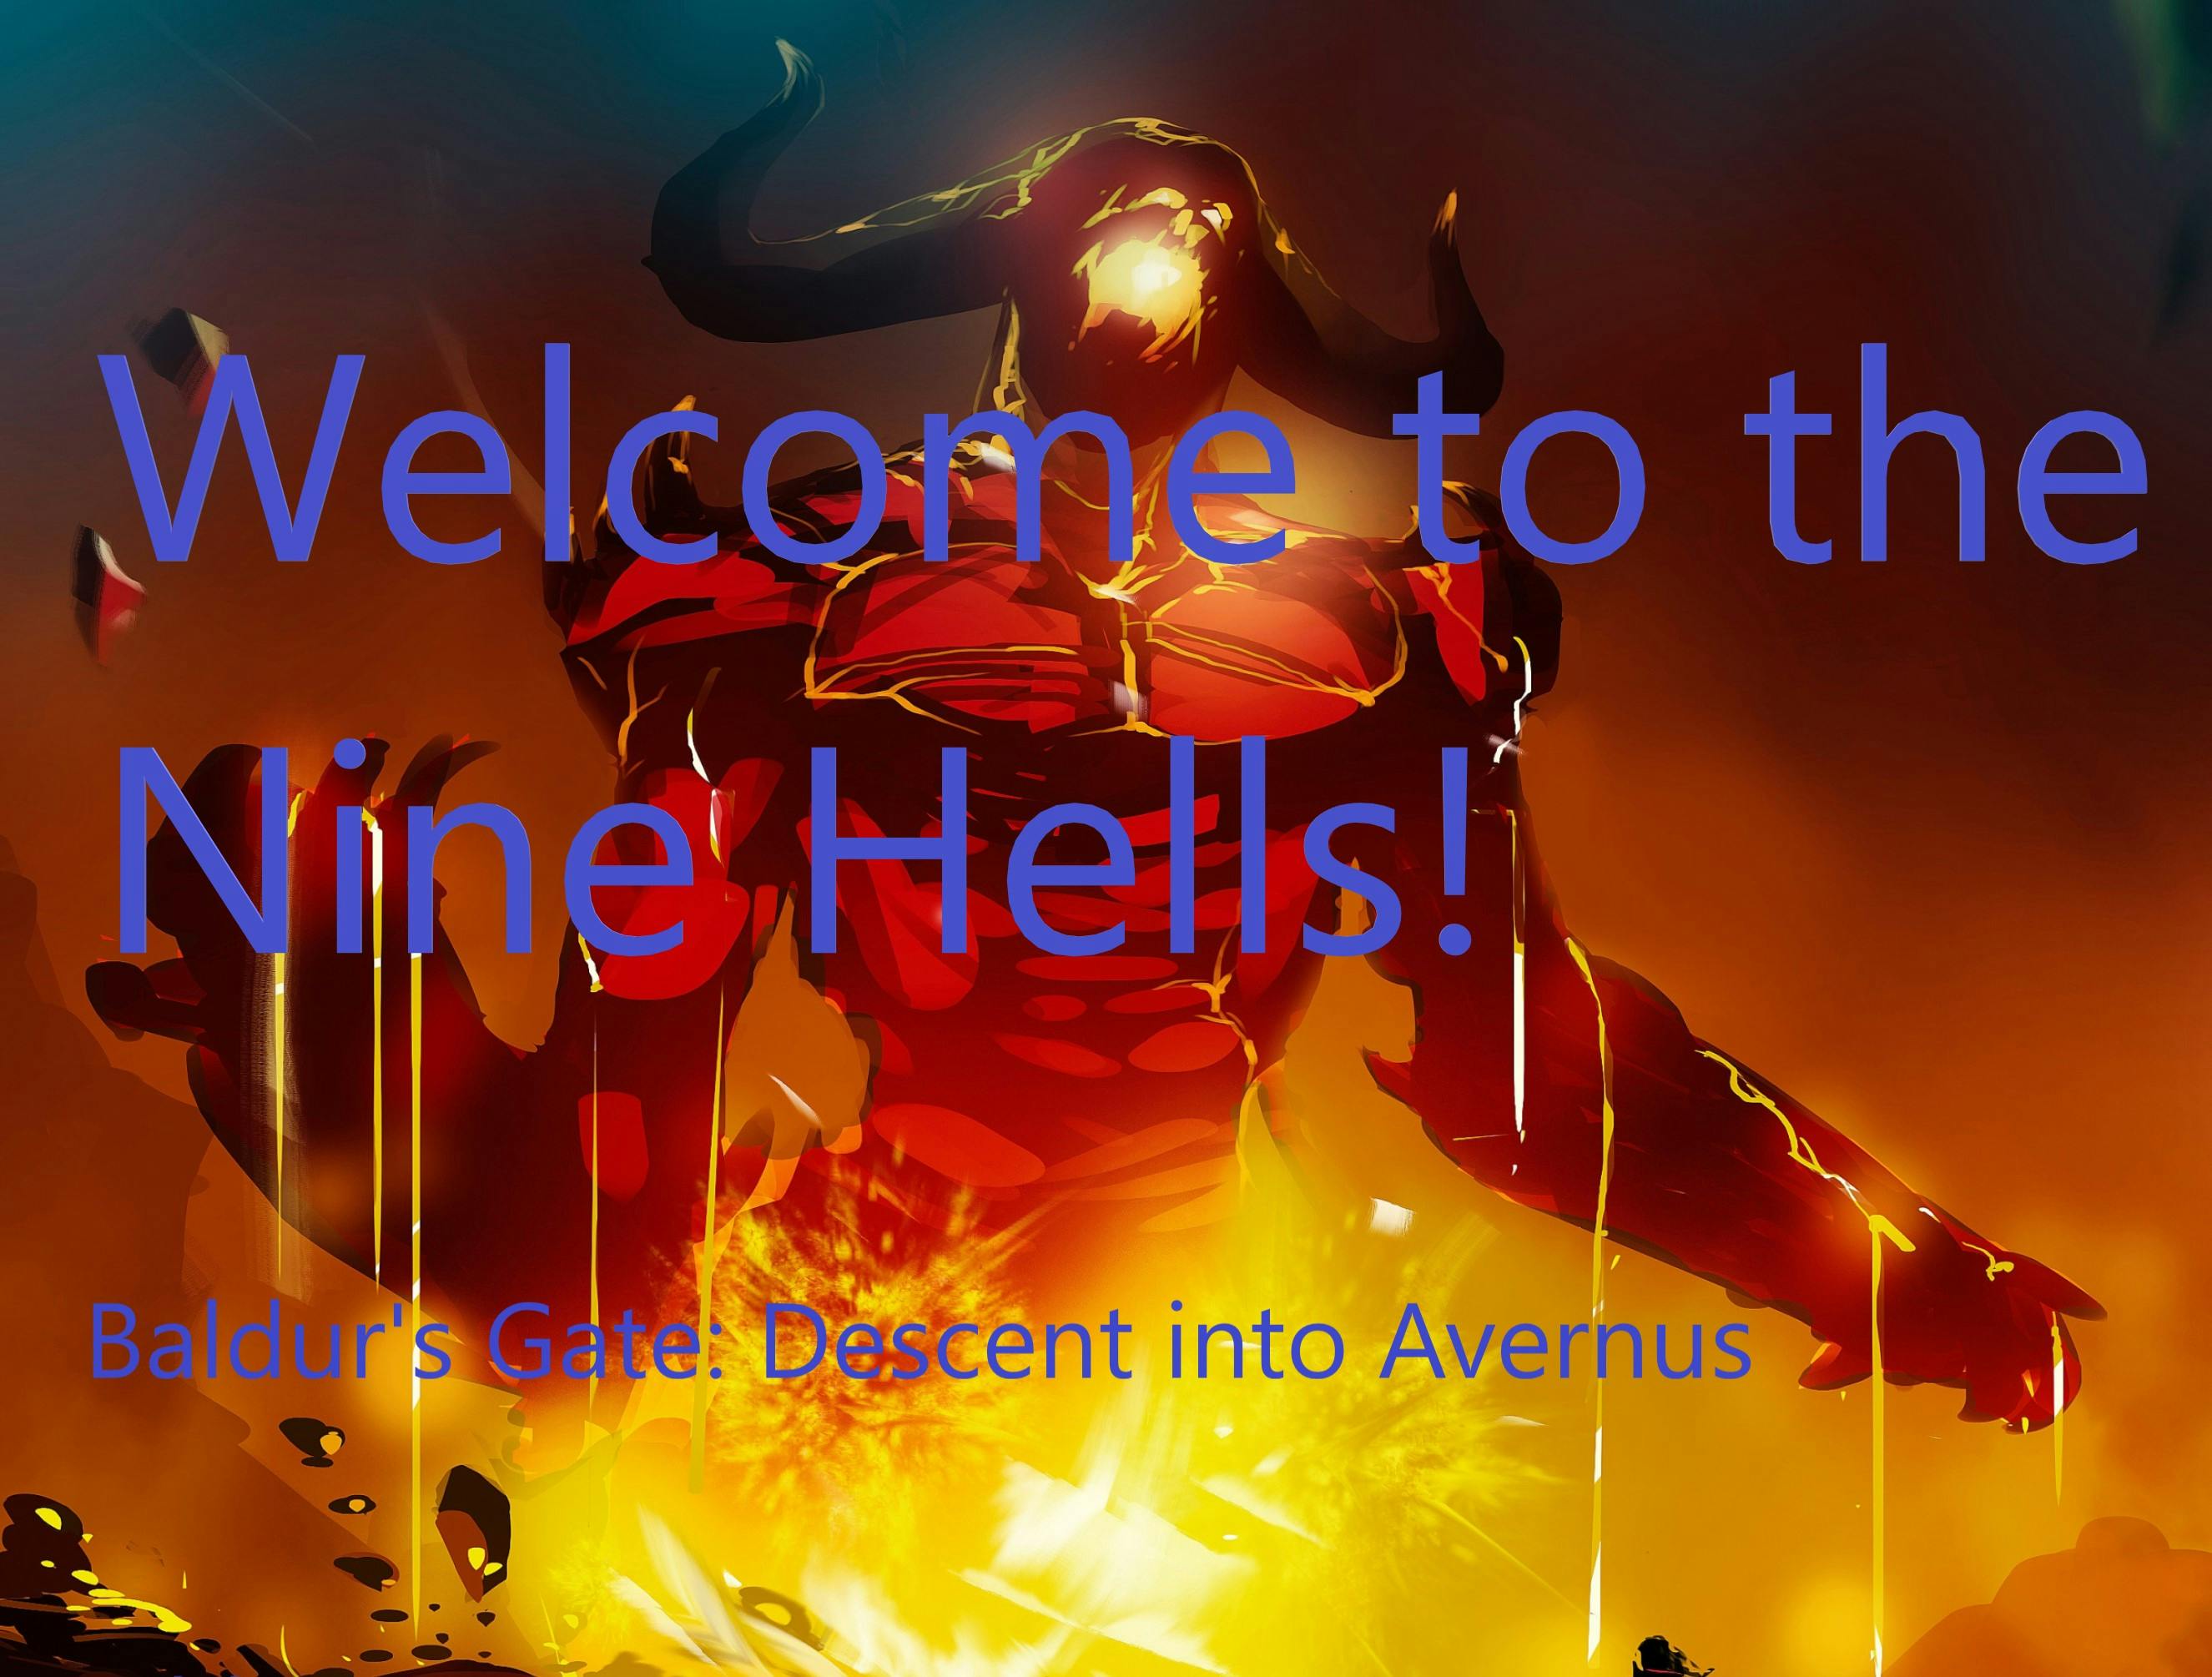 Welcome to the Nine Hells - Descent into Avernus